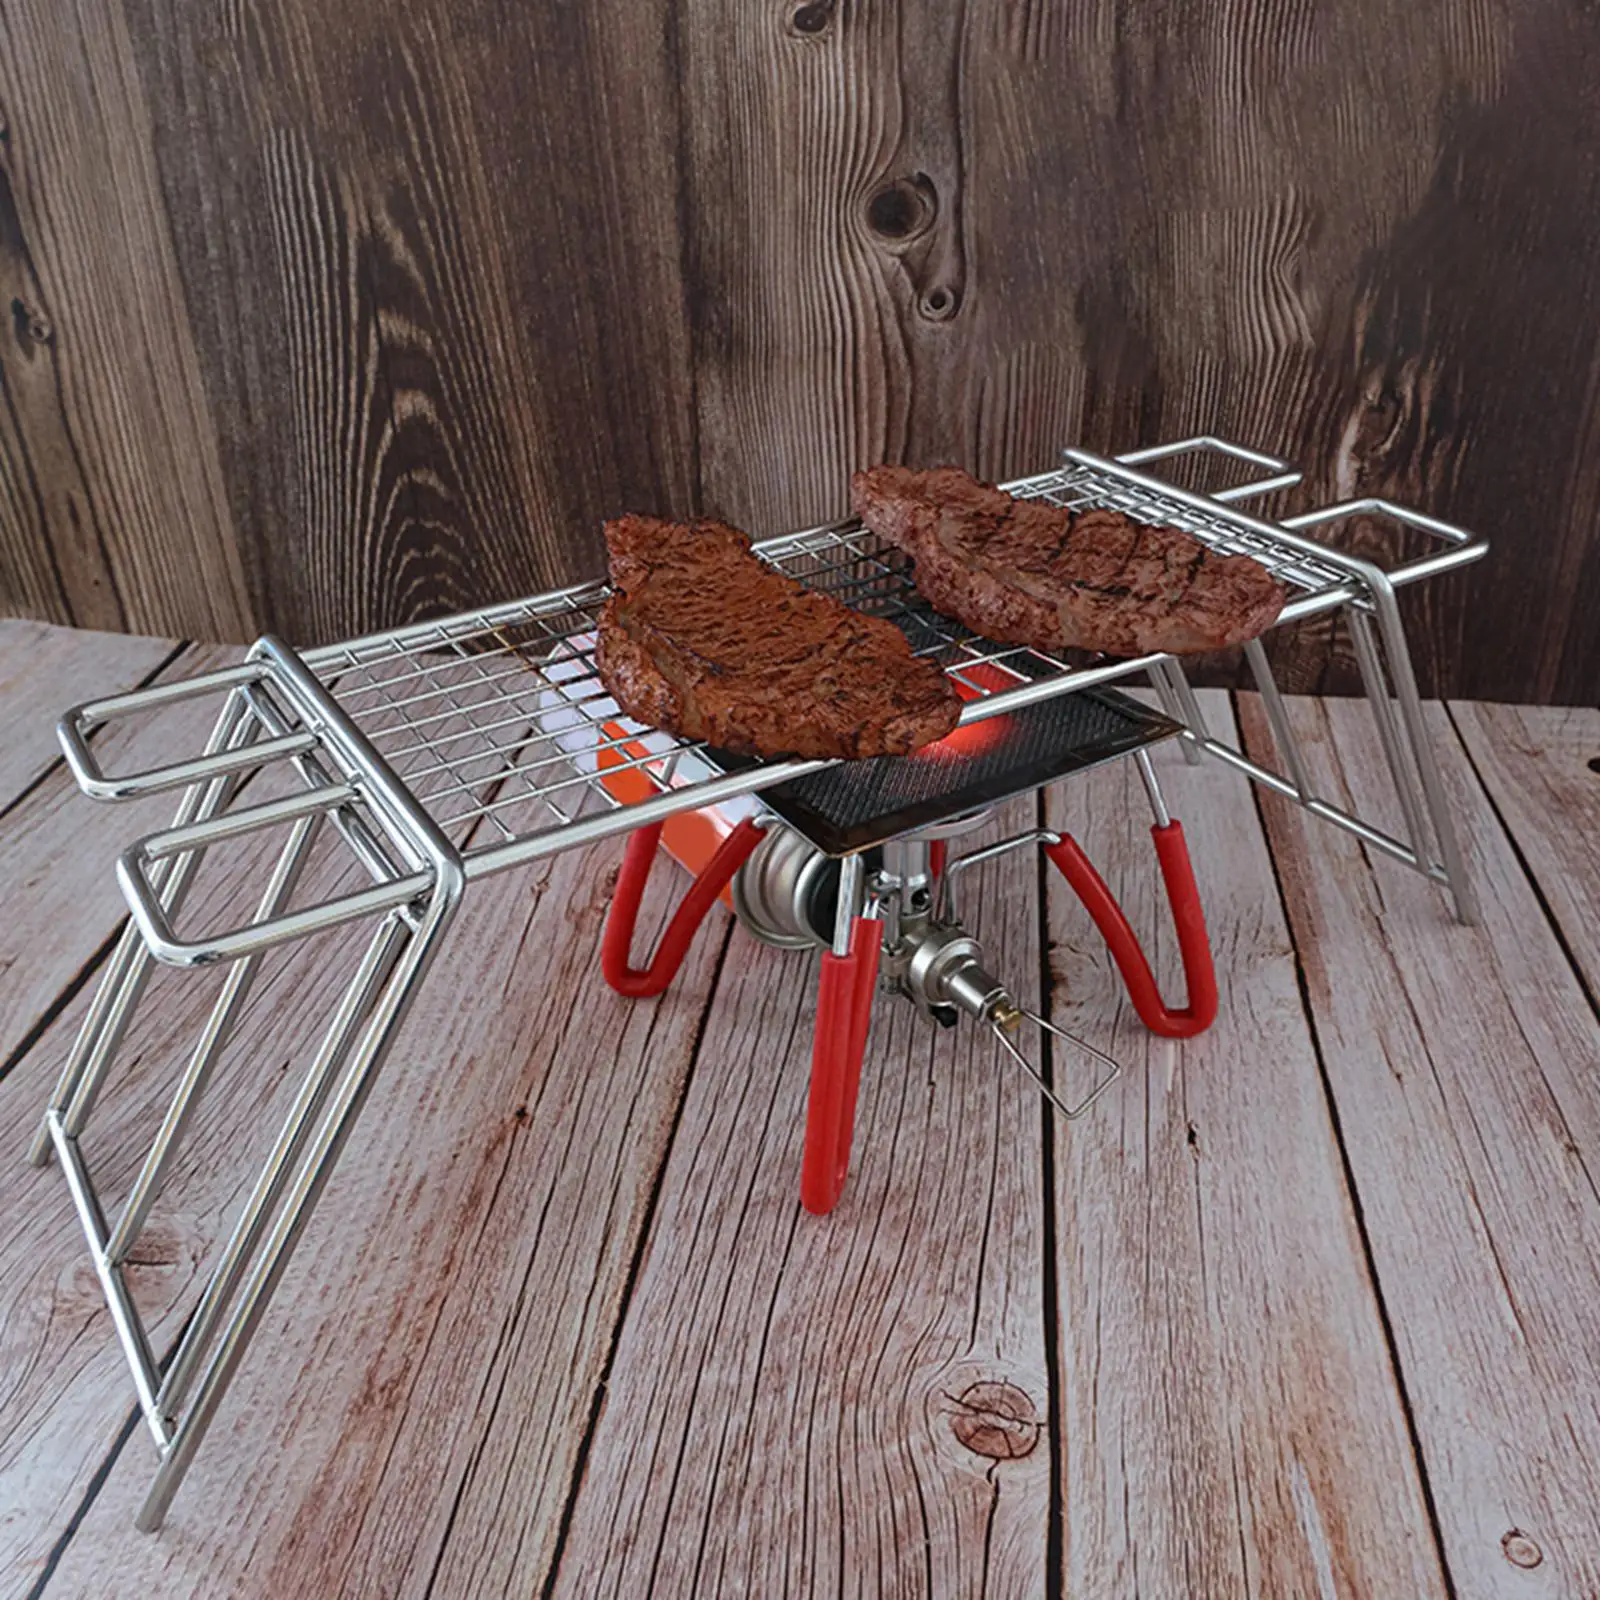 Barbecue Grill Pot Rack Foldable Leg Design Adjustable Height Cookware BBQ Net Mesh Rack for Hiking Picnics Traveling Fishing